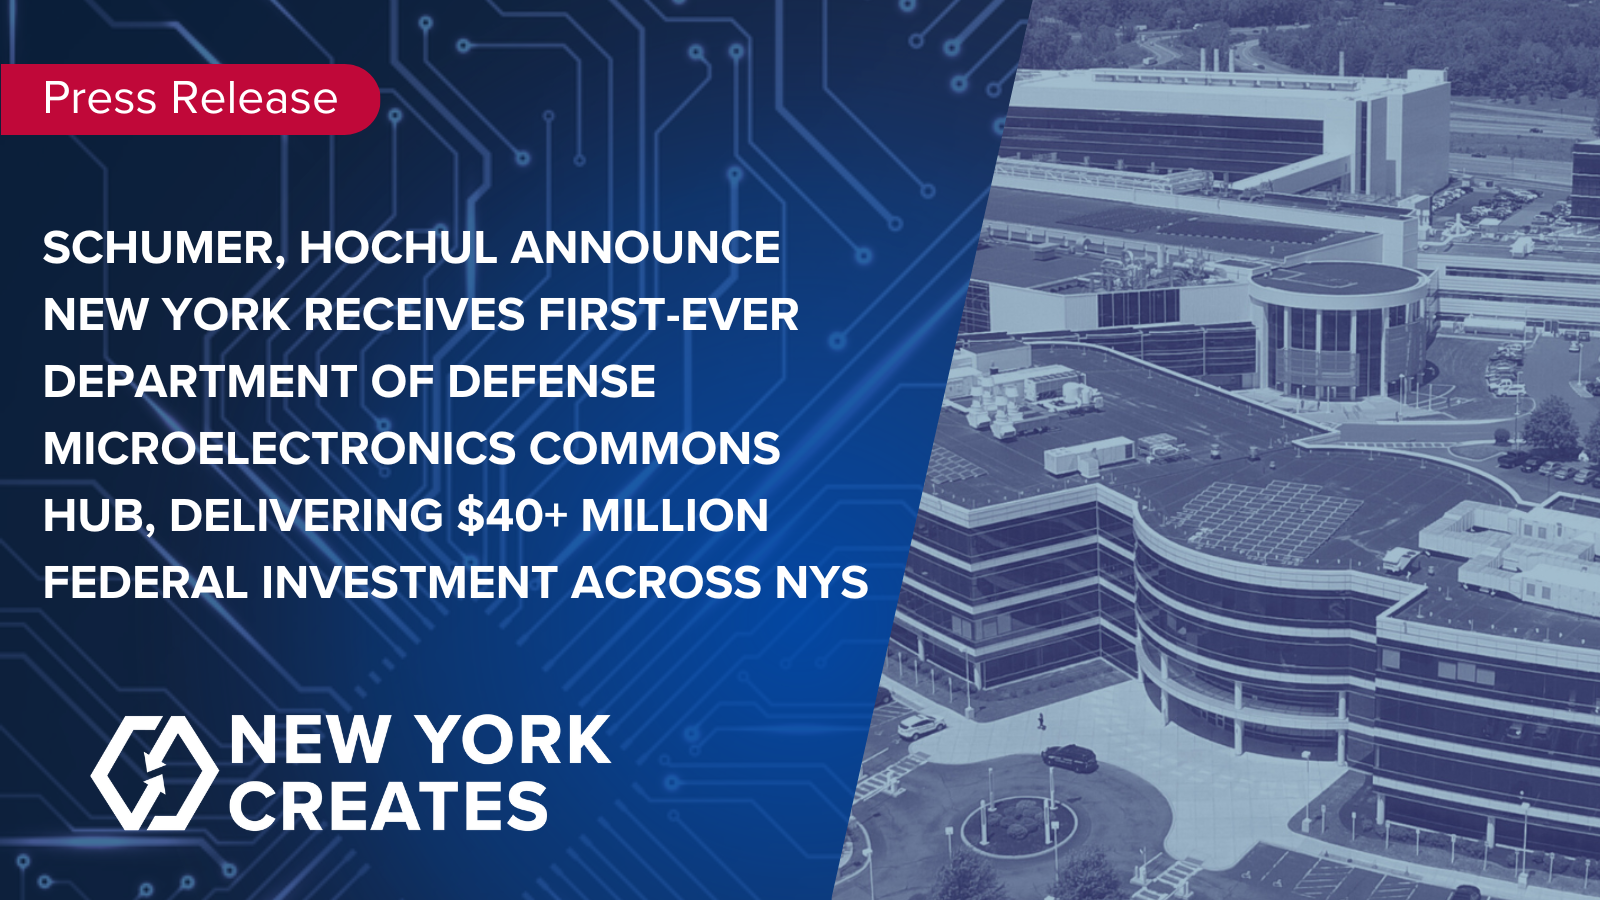 SCHUMER, HOCHUL ANNOUNCE NEW YORK RECEIVES FIRST-EVER DEPARTMENT OF DEFENSE MICROELECTRONICS COMMONS HUB, DELIVERING $40 MILLION FEDERAL INVESTMENT